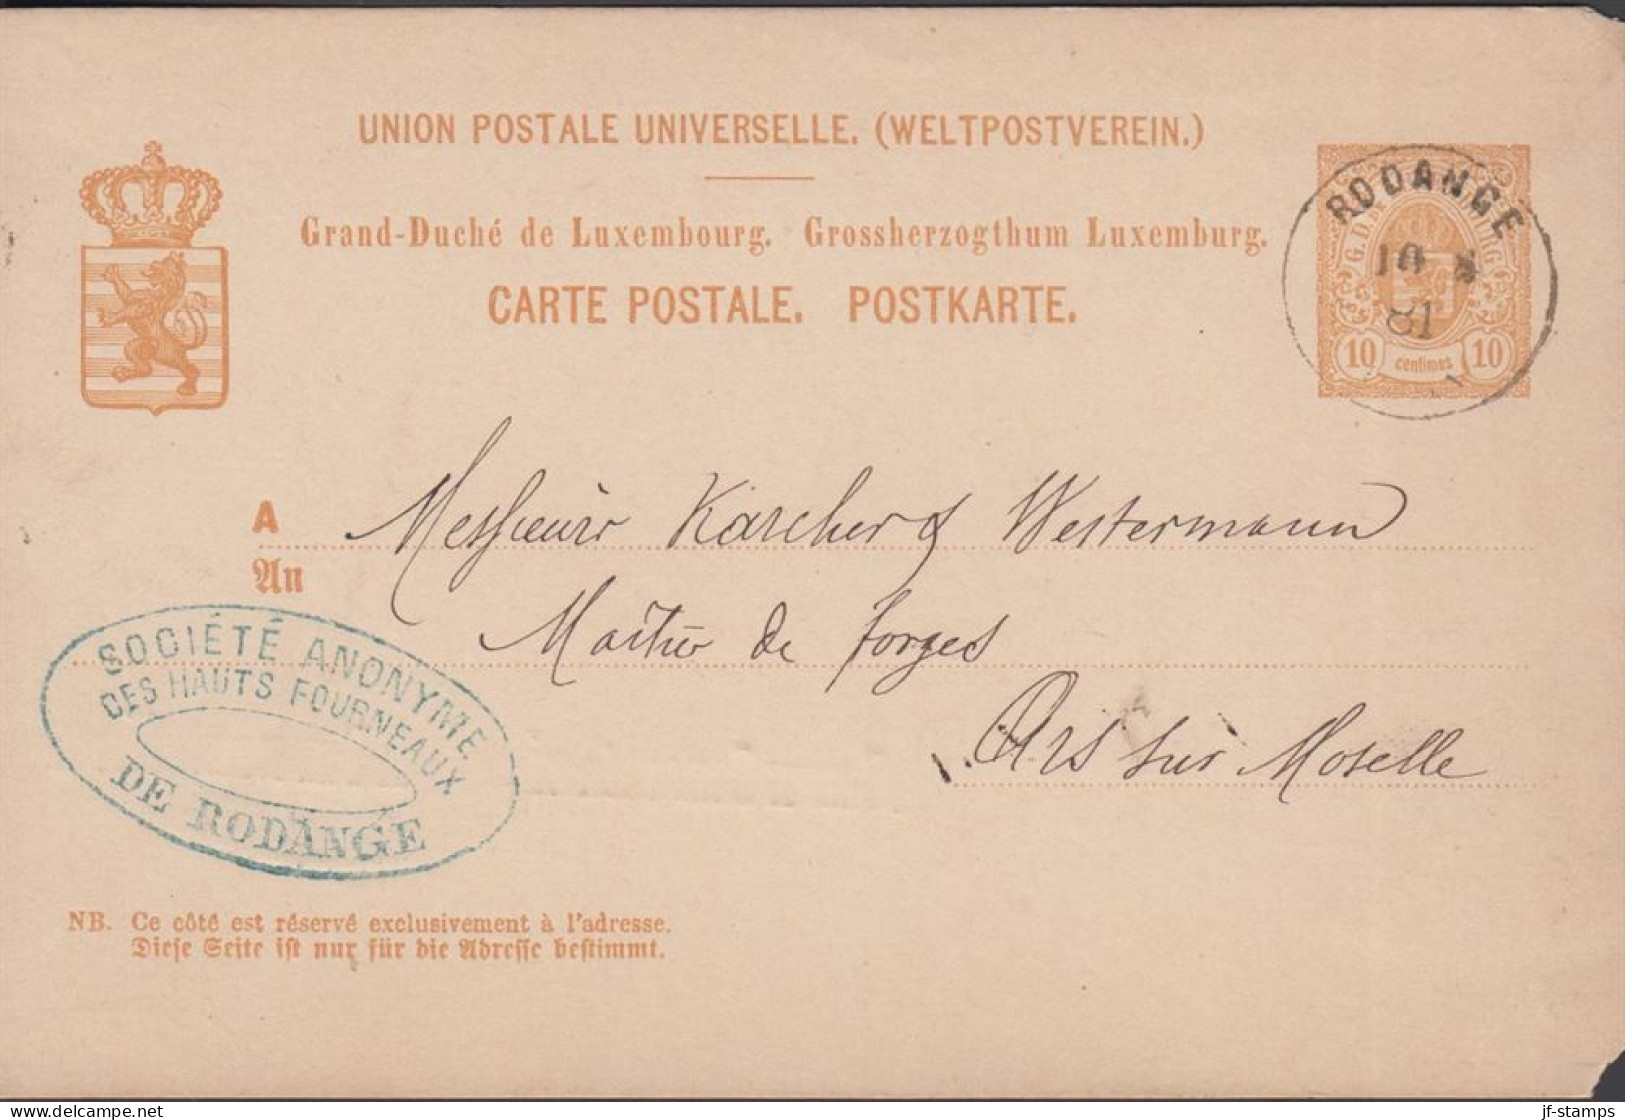 1881. LUXEMBOURG. 10 CENTIMES CARTE POSTALE Cancelled With LUXUS Cancel RODANGE 10 8 81. Sender SOCIETE AN... - JF445178 - Entiers Postaux